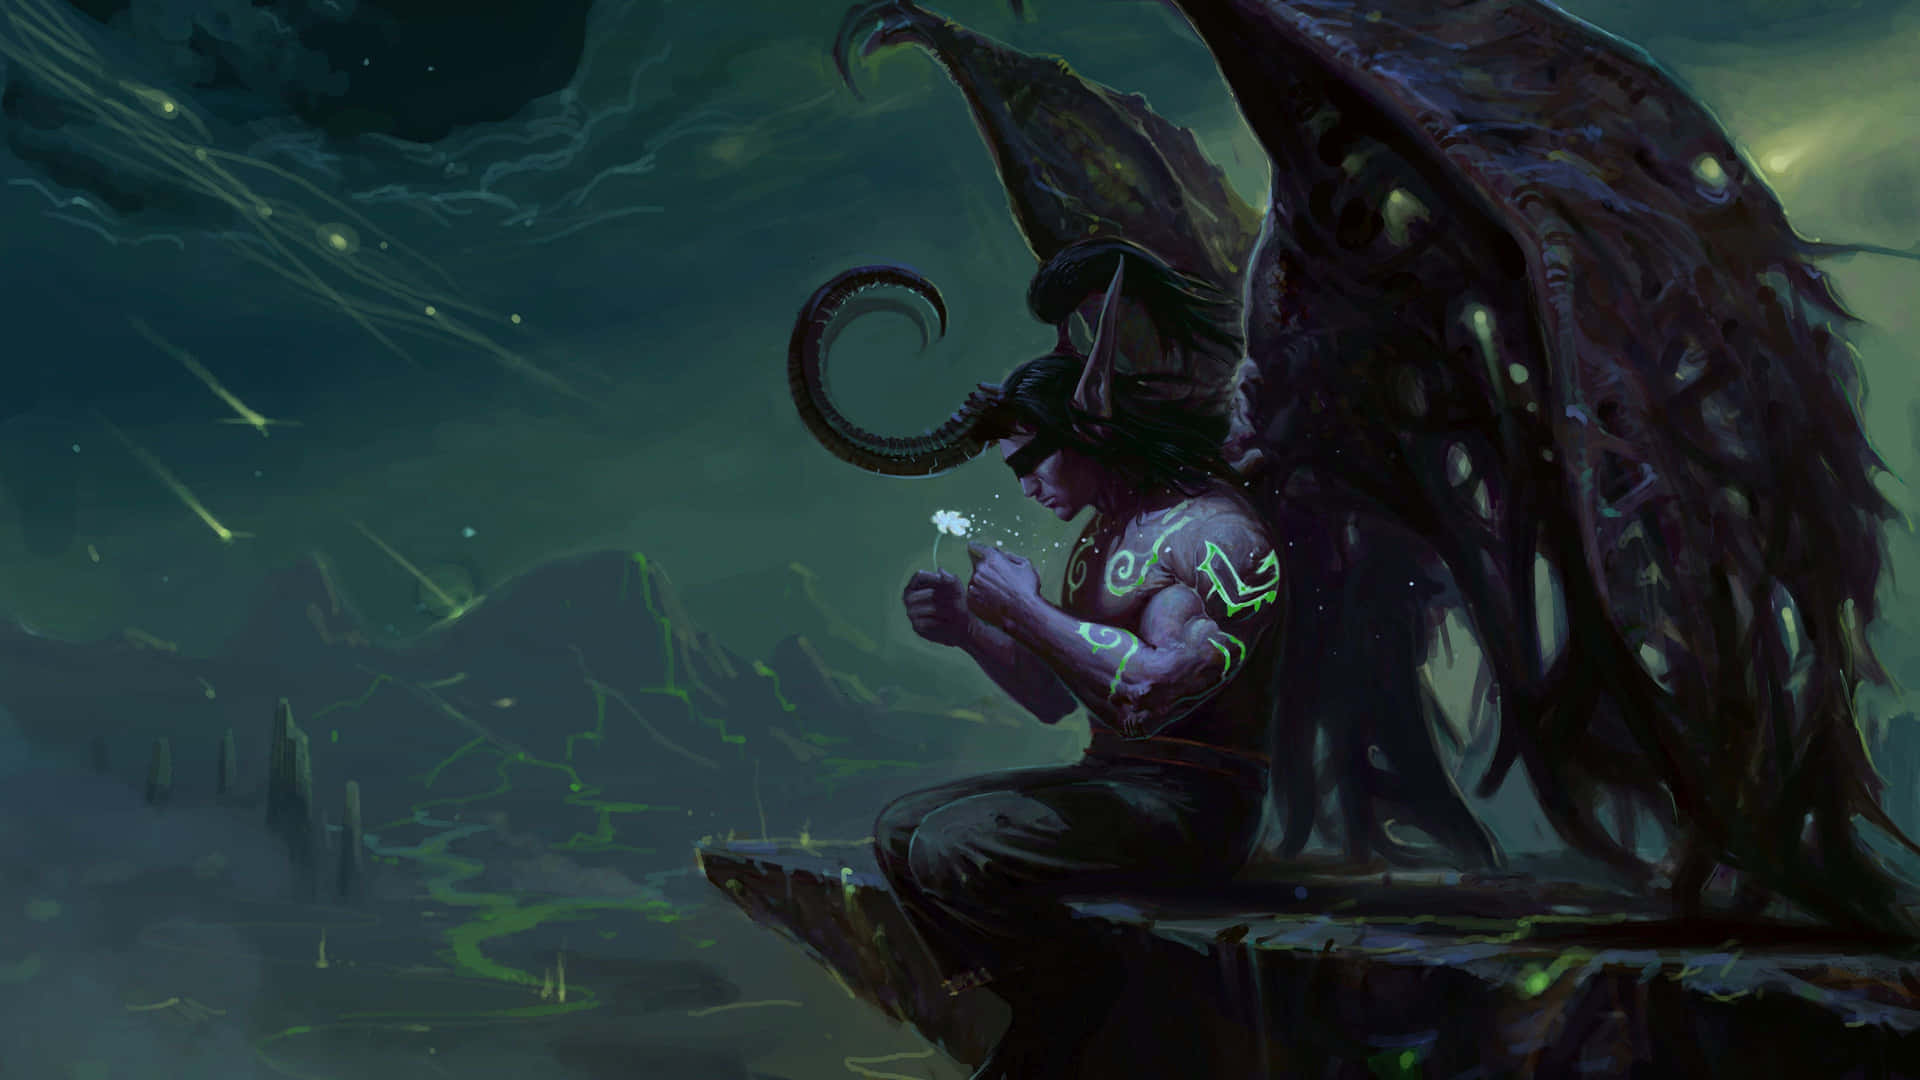 The Mighty Illidan Stormrage, Ruler Of Outland Wallpaper